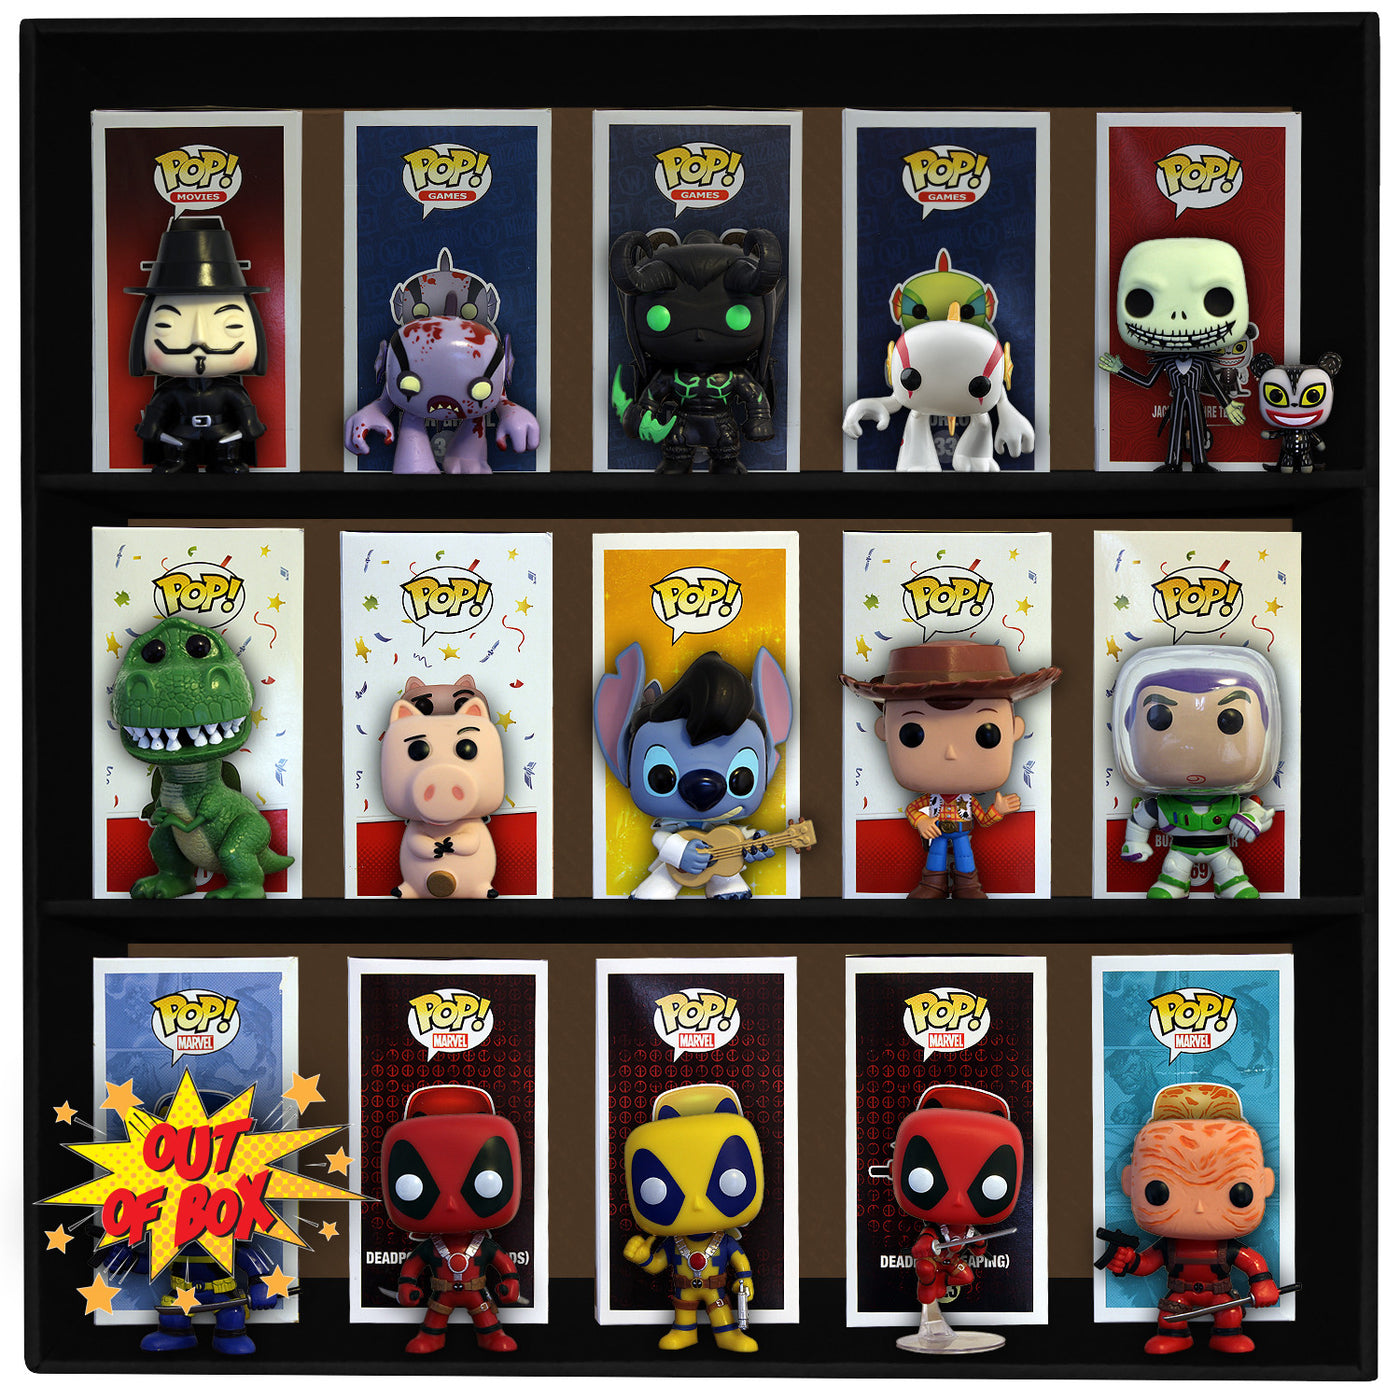 **BACK IN STOCK MAY 13TH** RETRO SPECIAL - 2 Displays & 10 Protectors for Funko Pops (LIMITED TIME ONLY!) - Display Geek